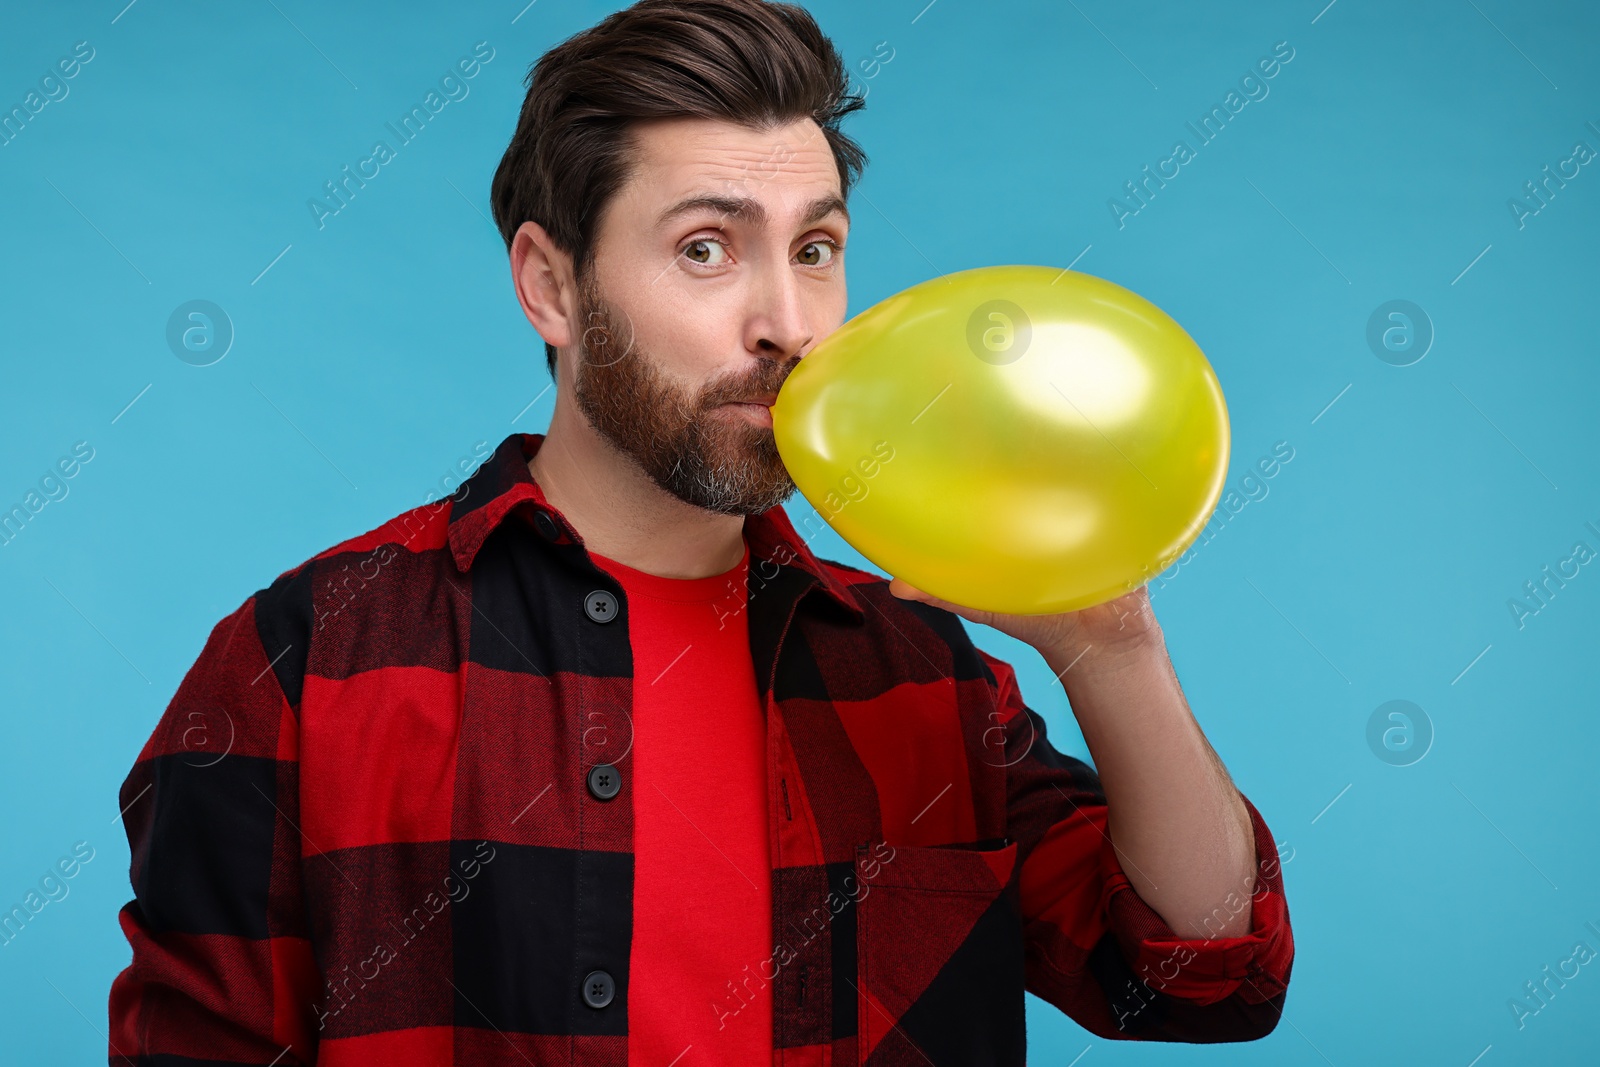 Photo of Man inflating yellow balloon on light blue background